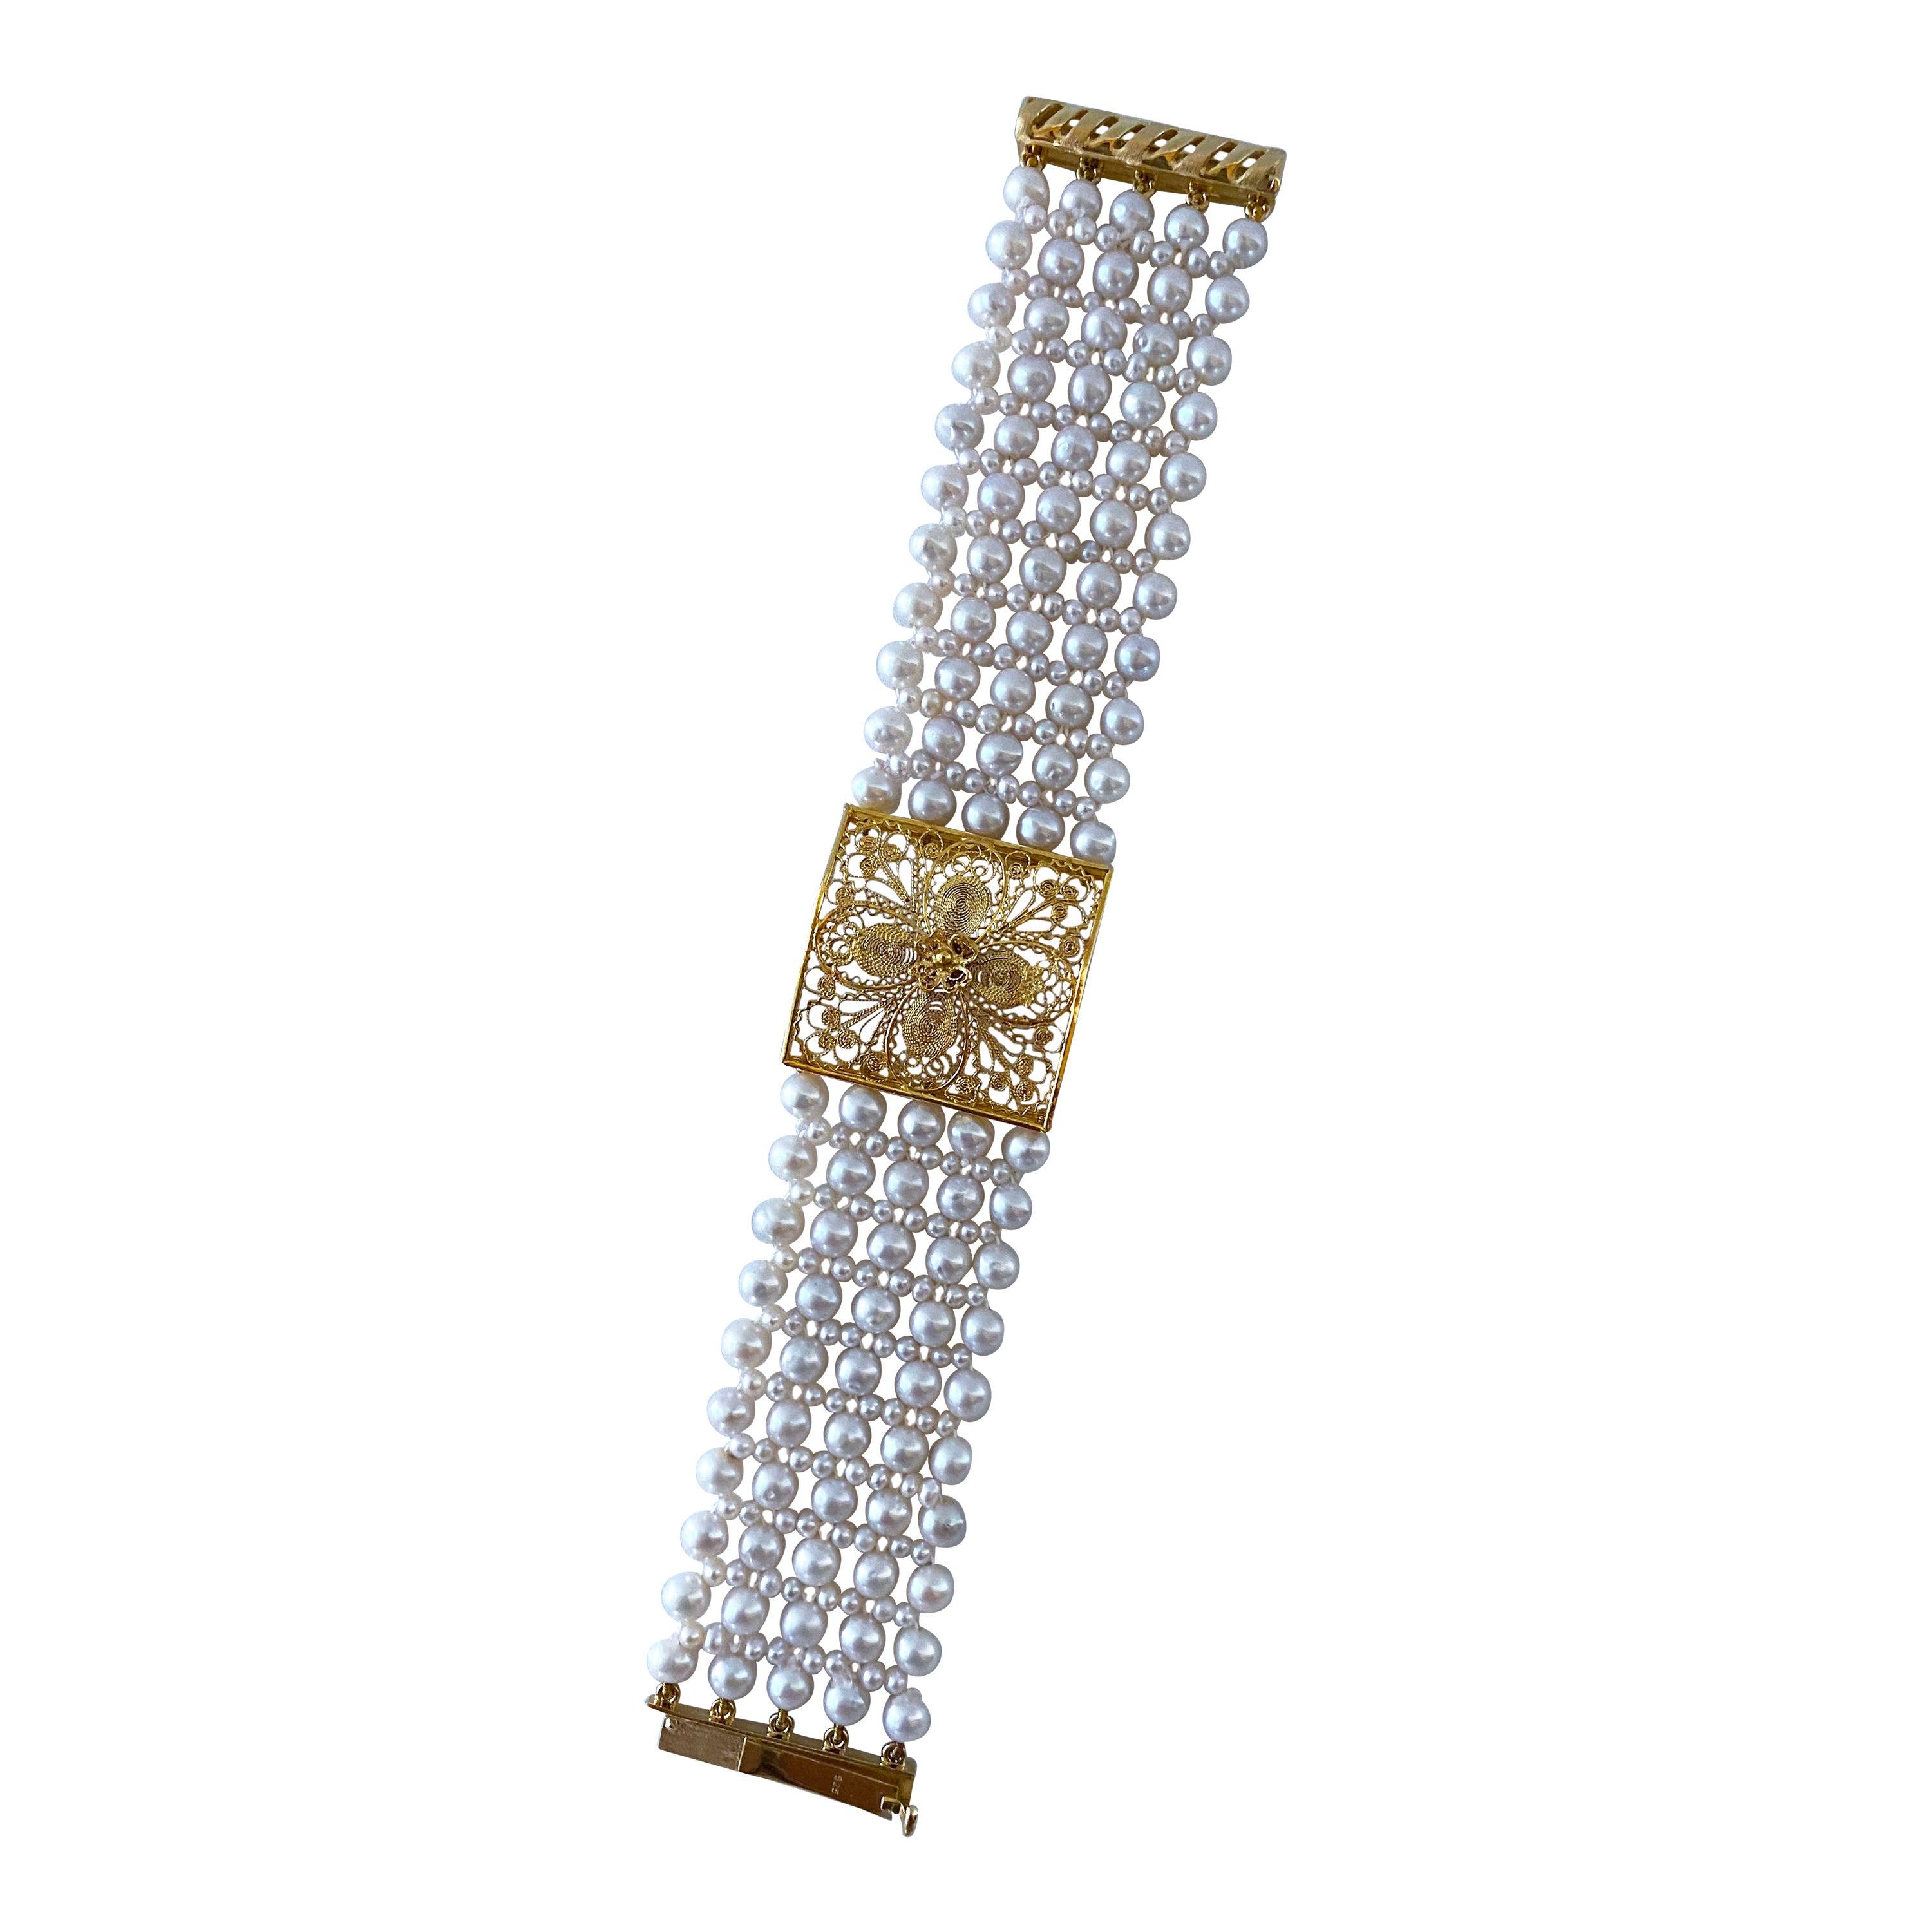 Marina J. Pearl Woven Bracelet with 18k Yellow Gold Floral Centerpiece 